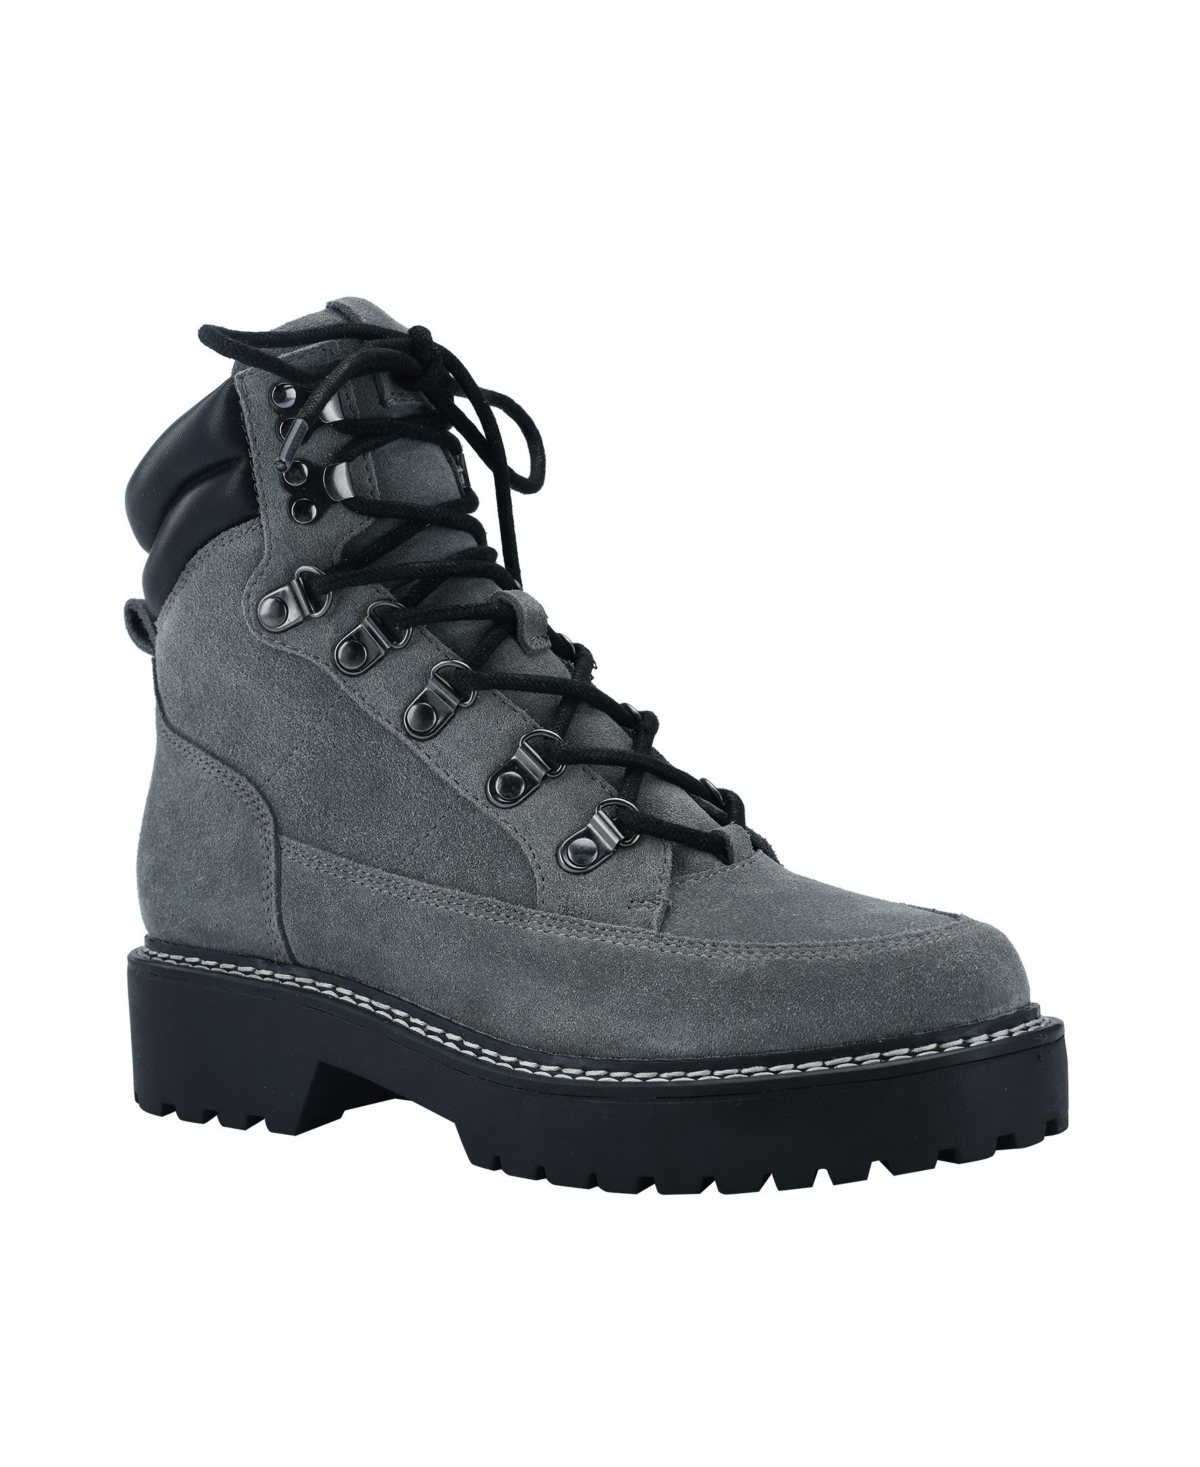 UPC 195972768031 product image for Calvin Klein Women's Shania Lace Up Lug Sole Hiker Boots Women's Shoes | upcitemdb.com